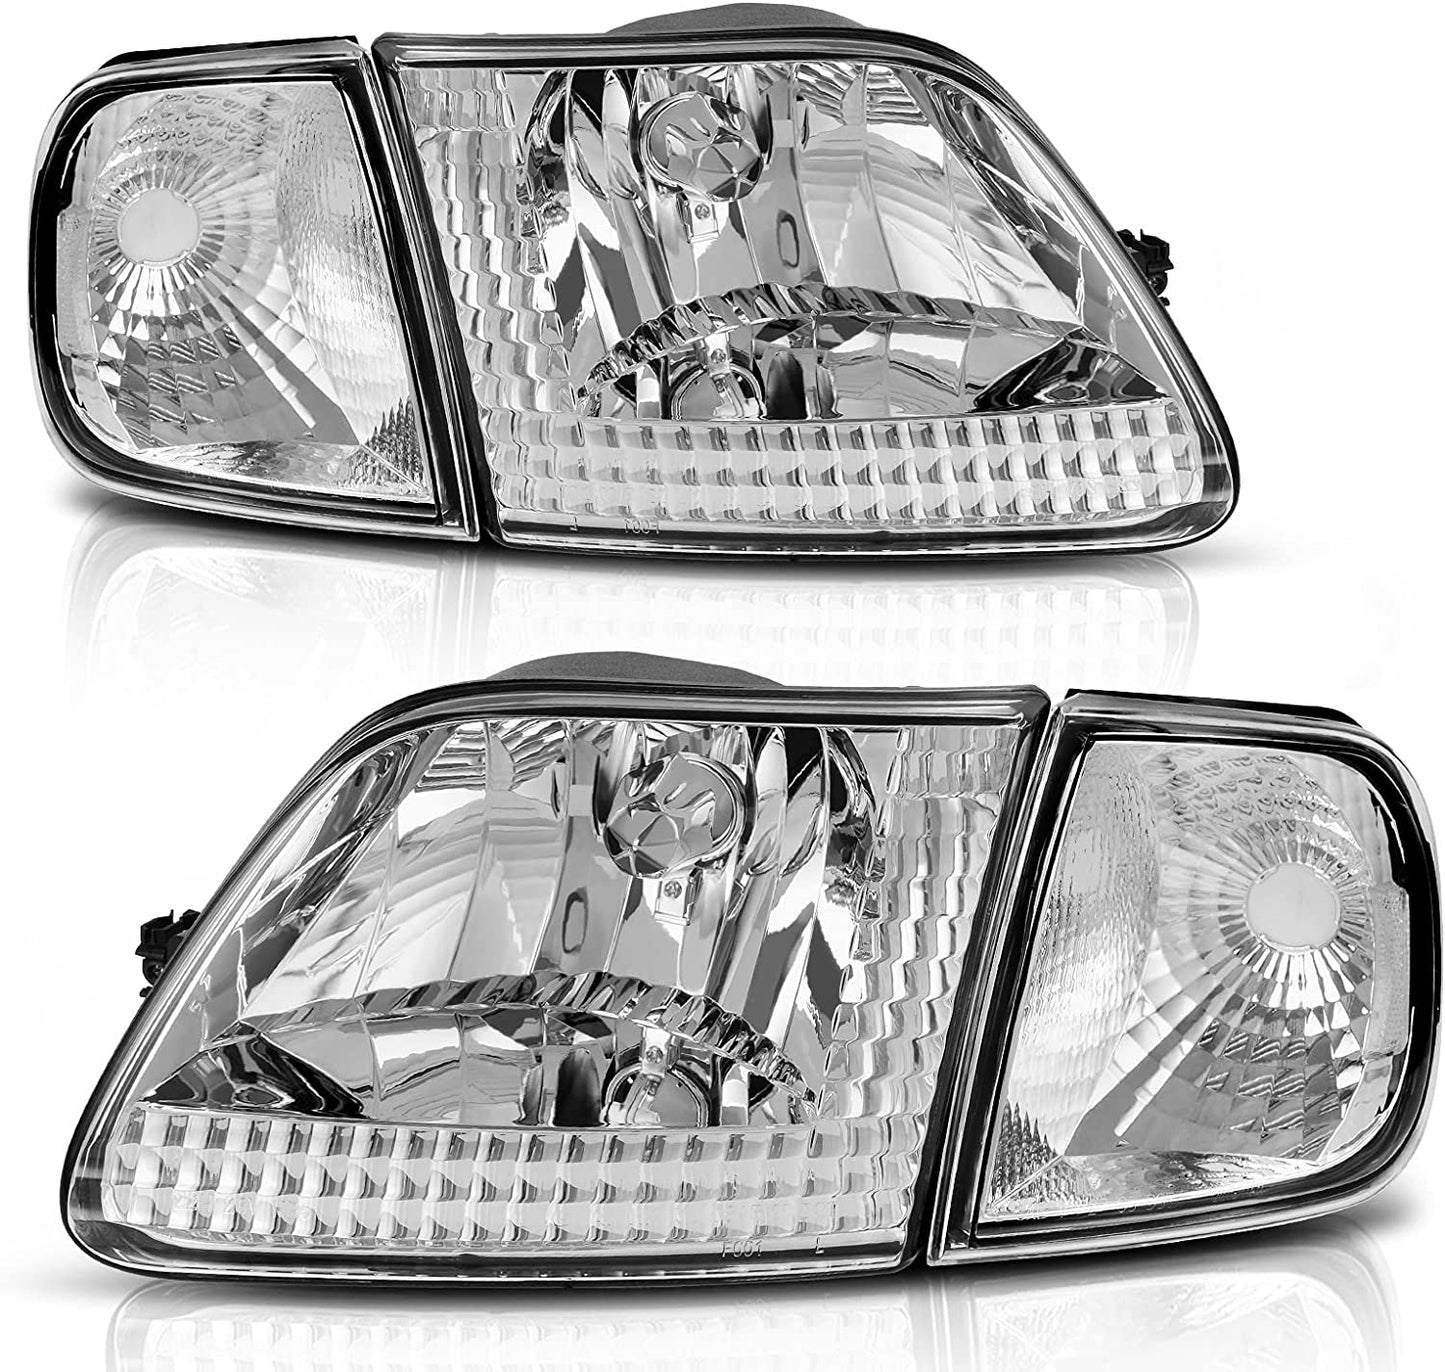 Headlight Assembly, Headlight Replacement, Fits 97-03 Ford F-150/97-02 Ford Expedition Pickup